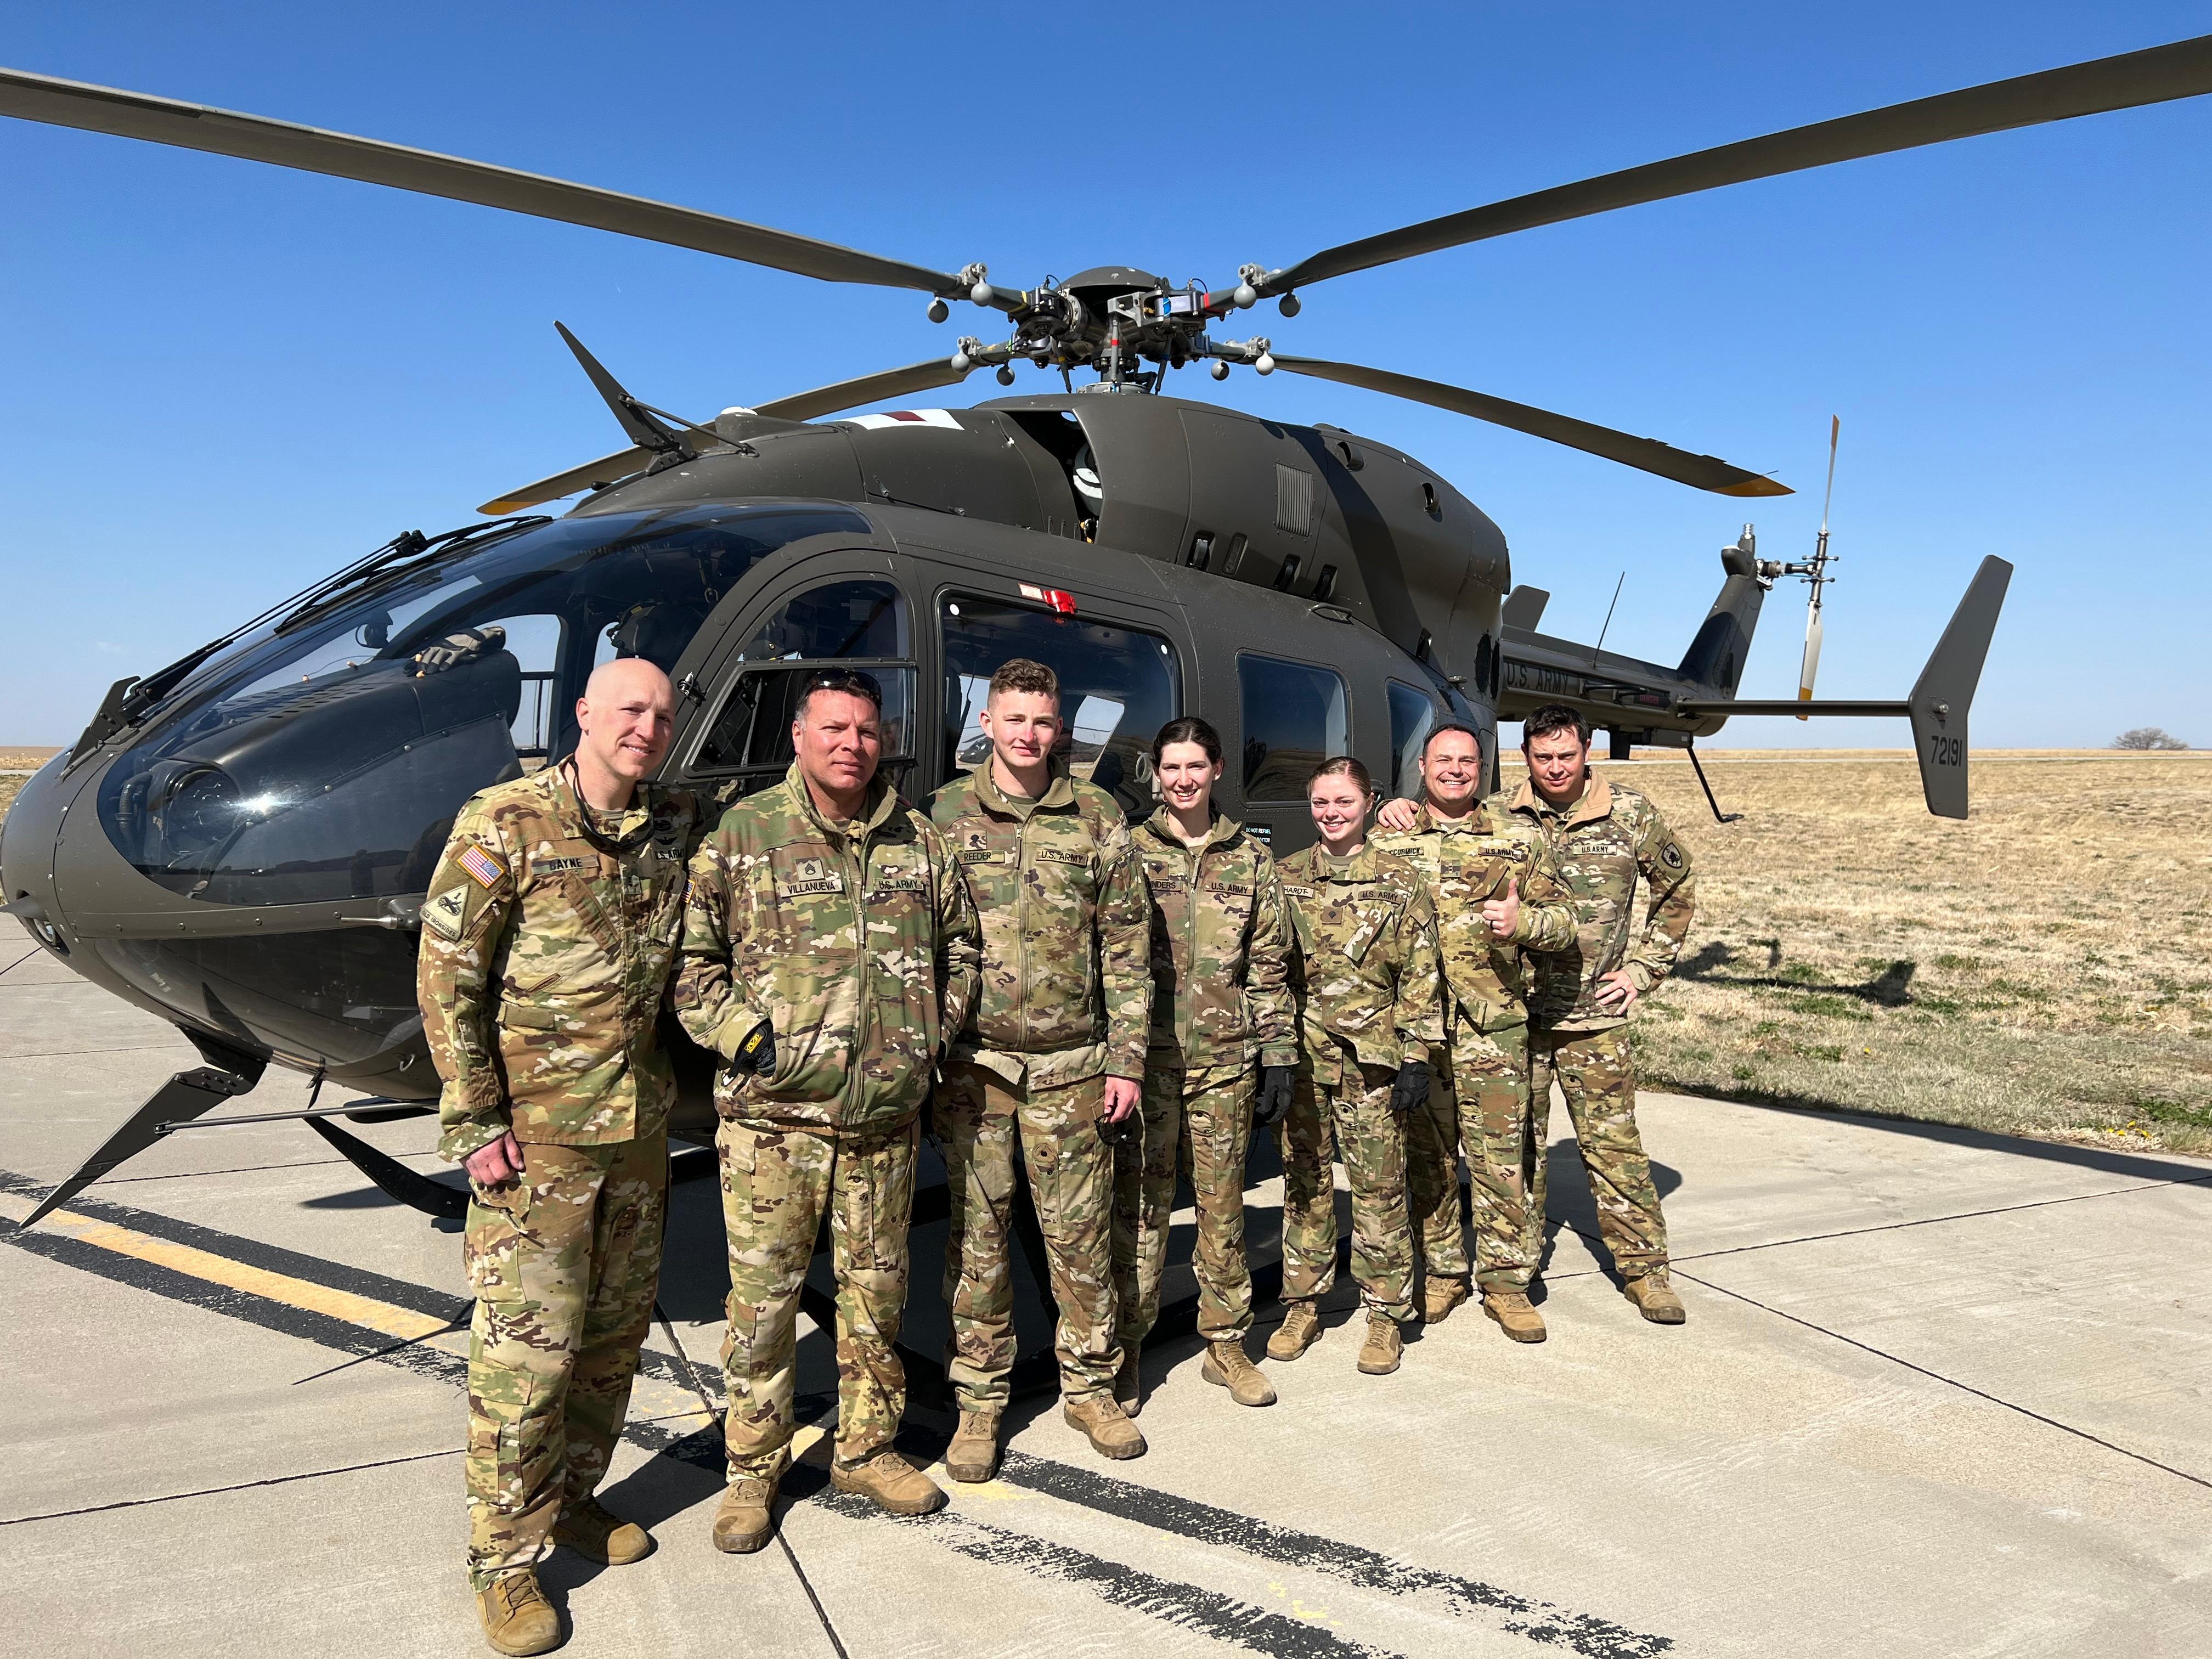 Soldiers of D Co, 1-376th Aviation Battalion out of Grand Island gather for a photo today in McCook where they have been supporting wildfire response the past four days. Pictured in front of the UH-72 Lakota helicopter (L-R): Chief Warrant Officer 3 Chad